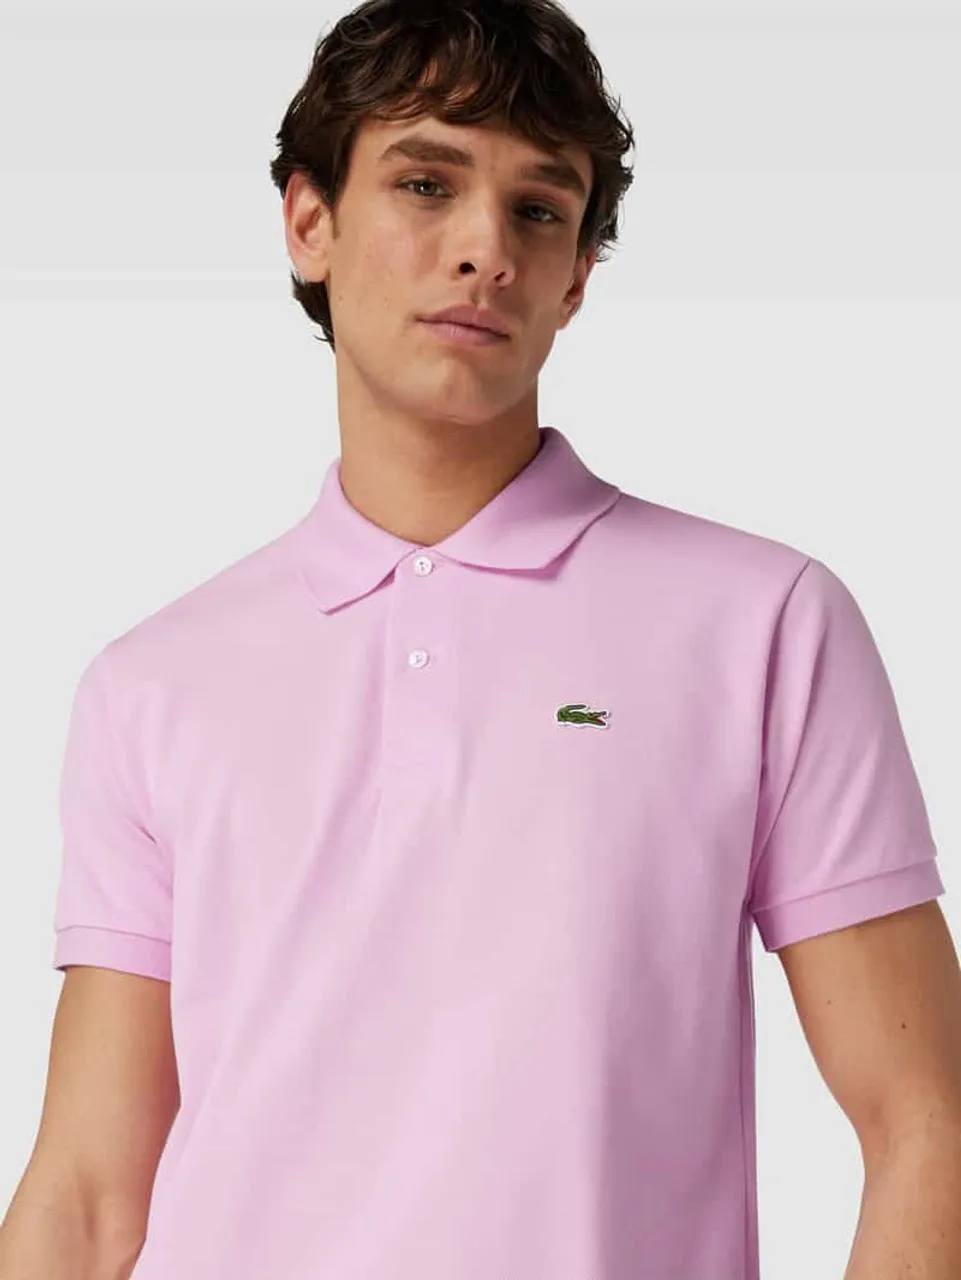 Lacoste Poloshirt mit Label-Stitching in Altrosa